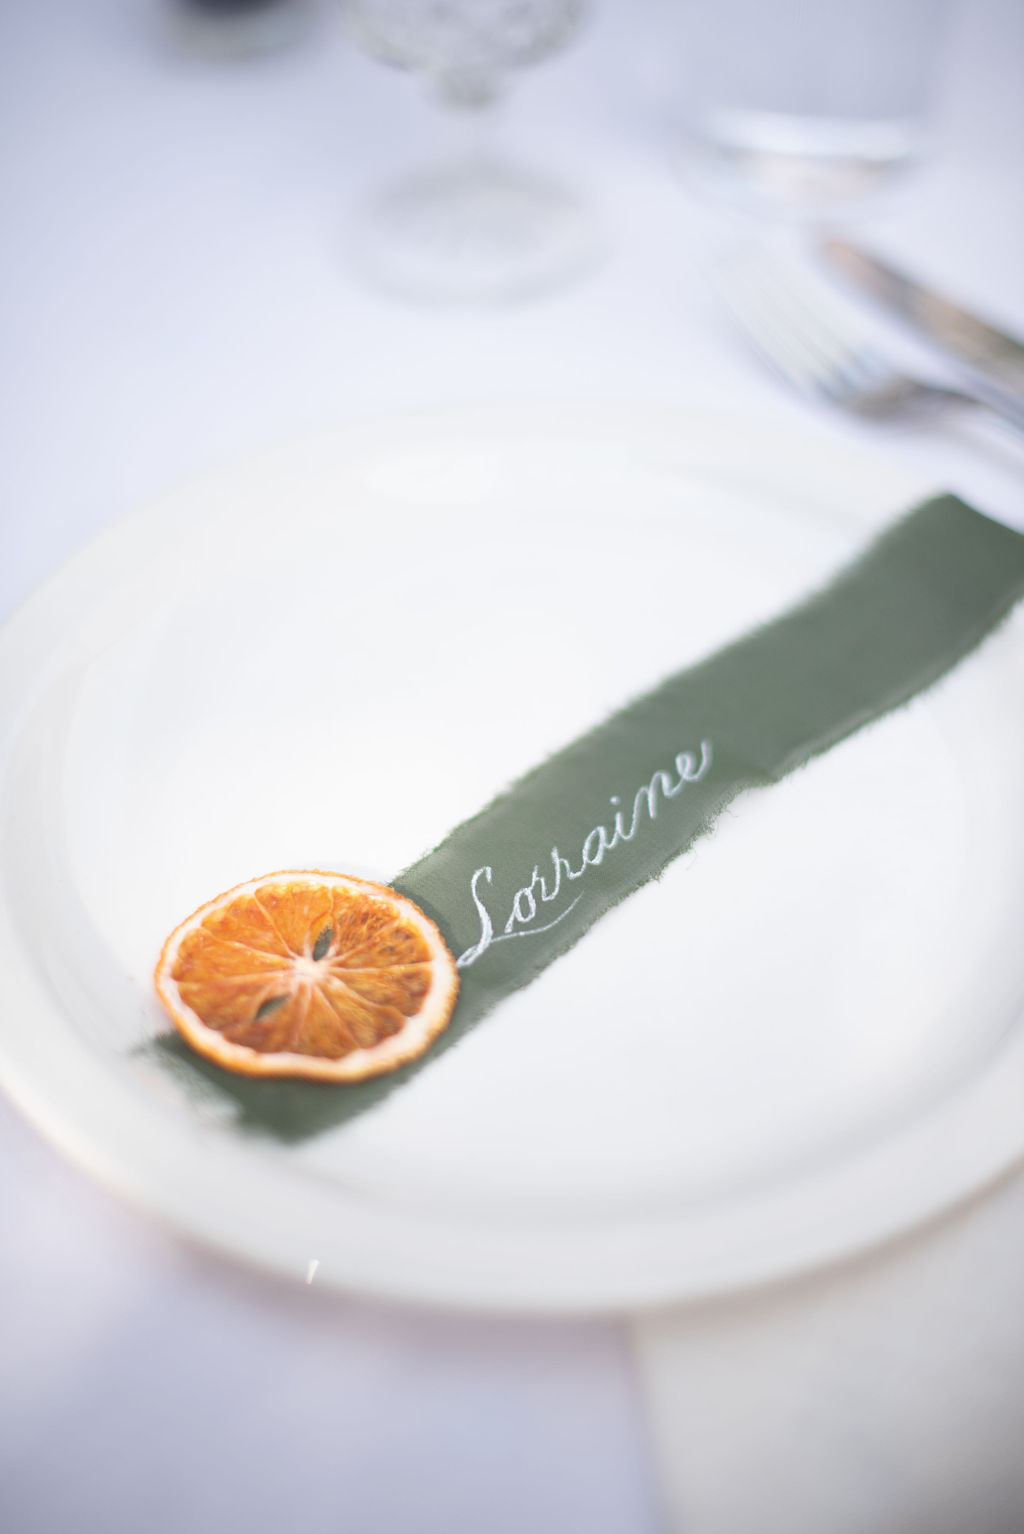 Wedding place settings created with orange slices and olive ribbon